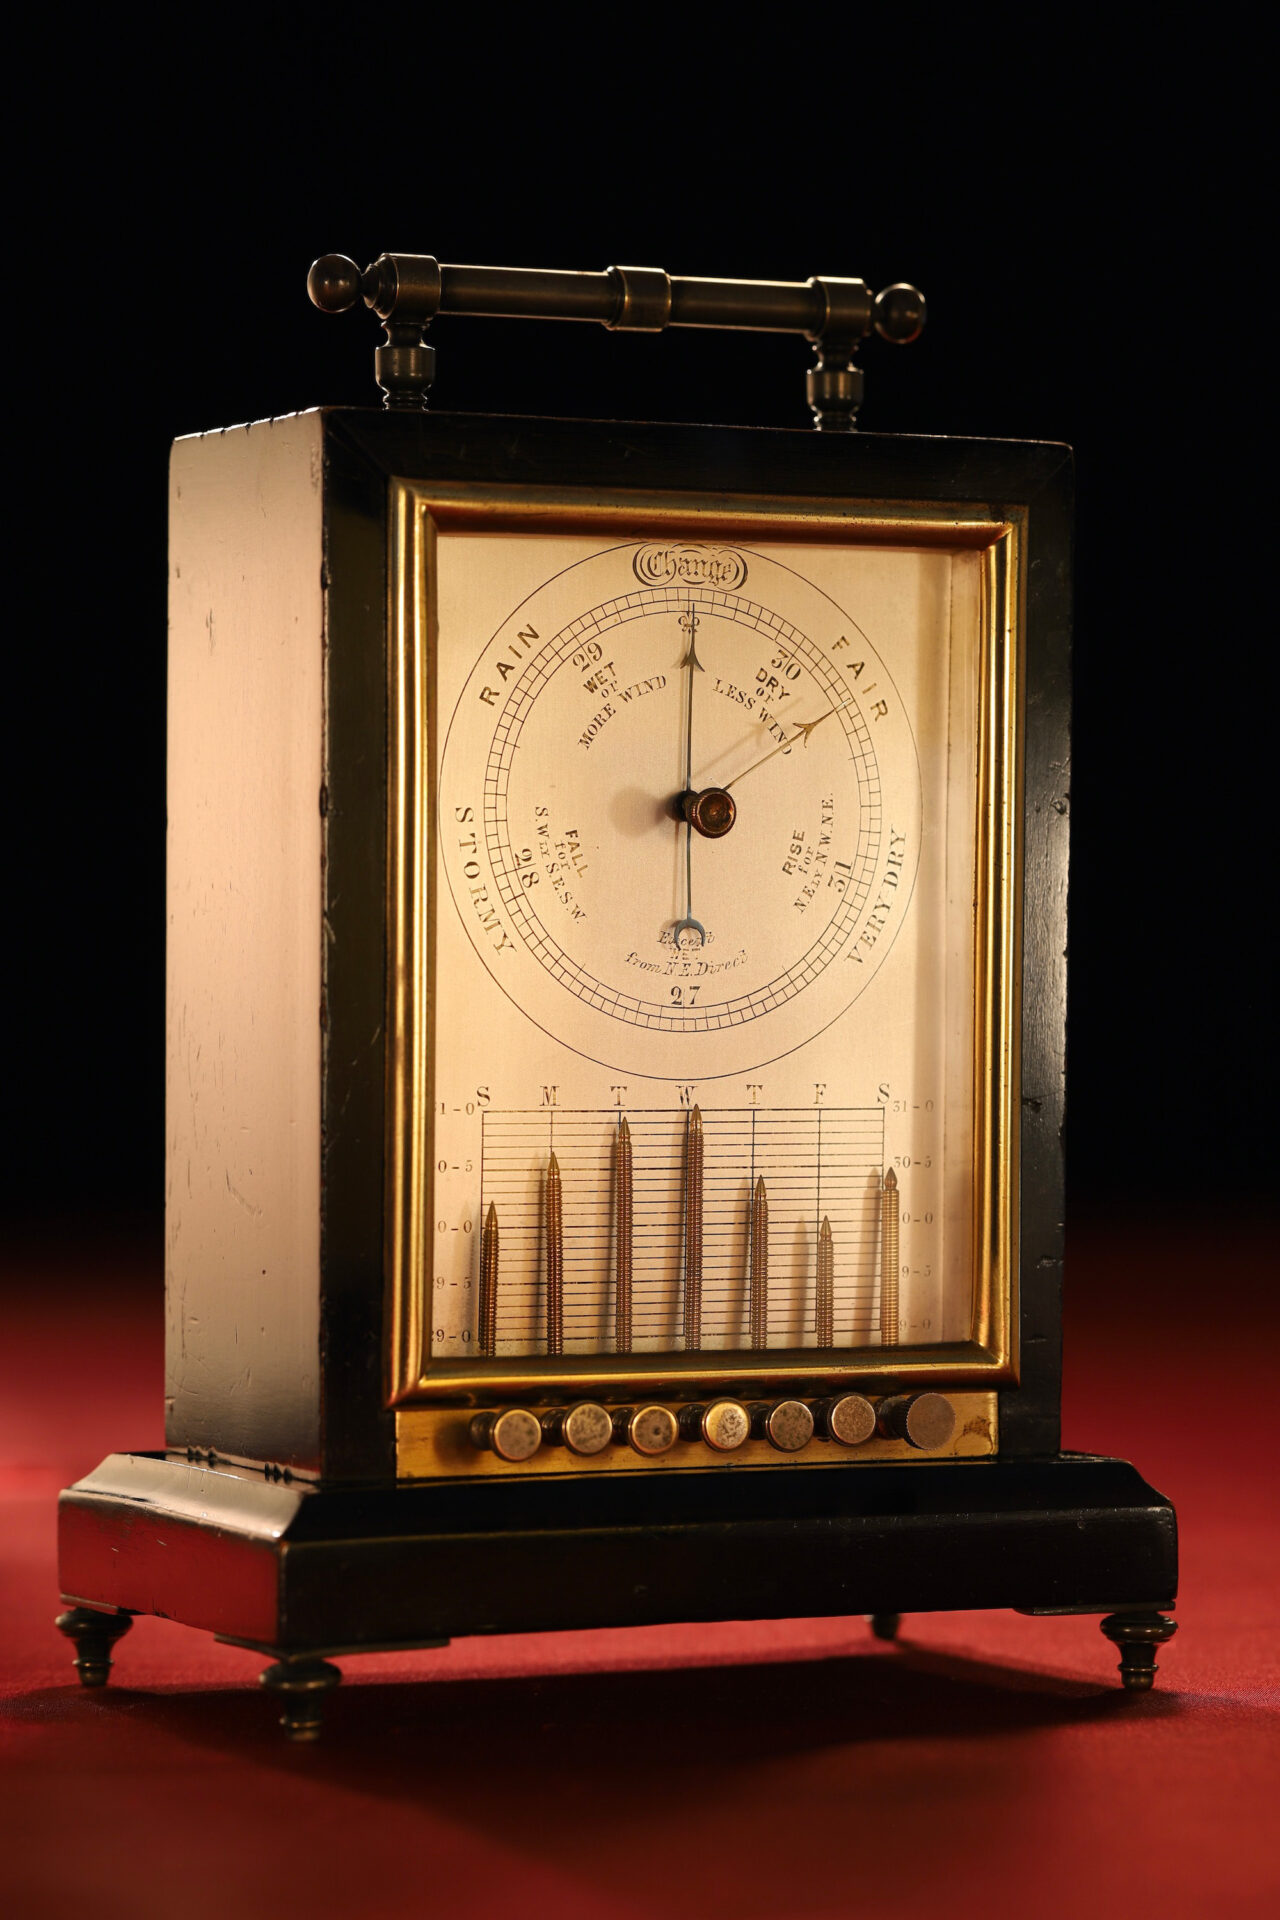 VERY RARE FRENCH ANEROID RECORDING BAROMETER OR BAROGRAPH c1870